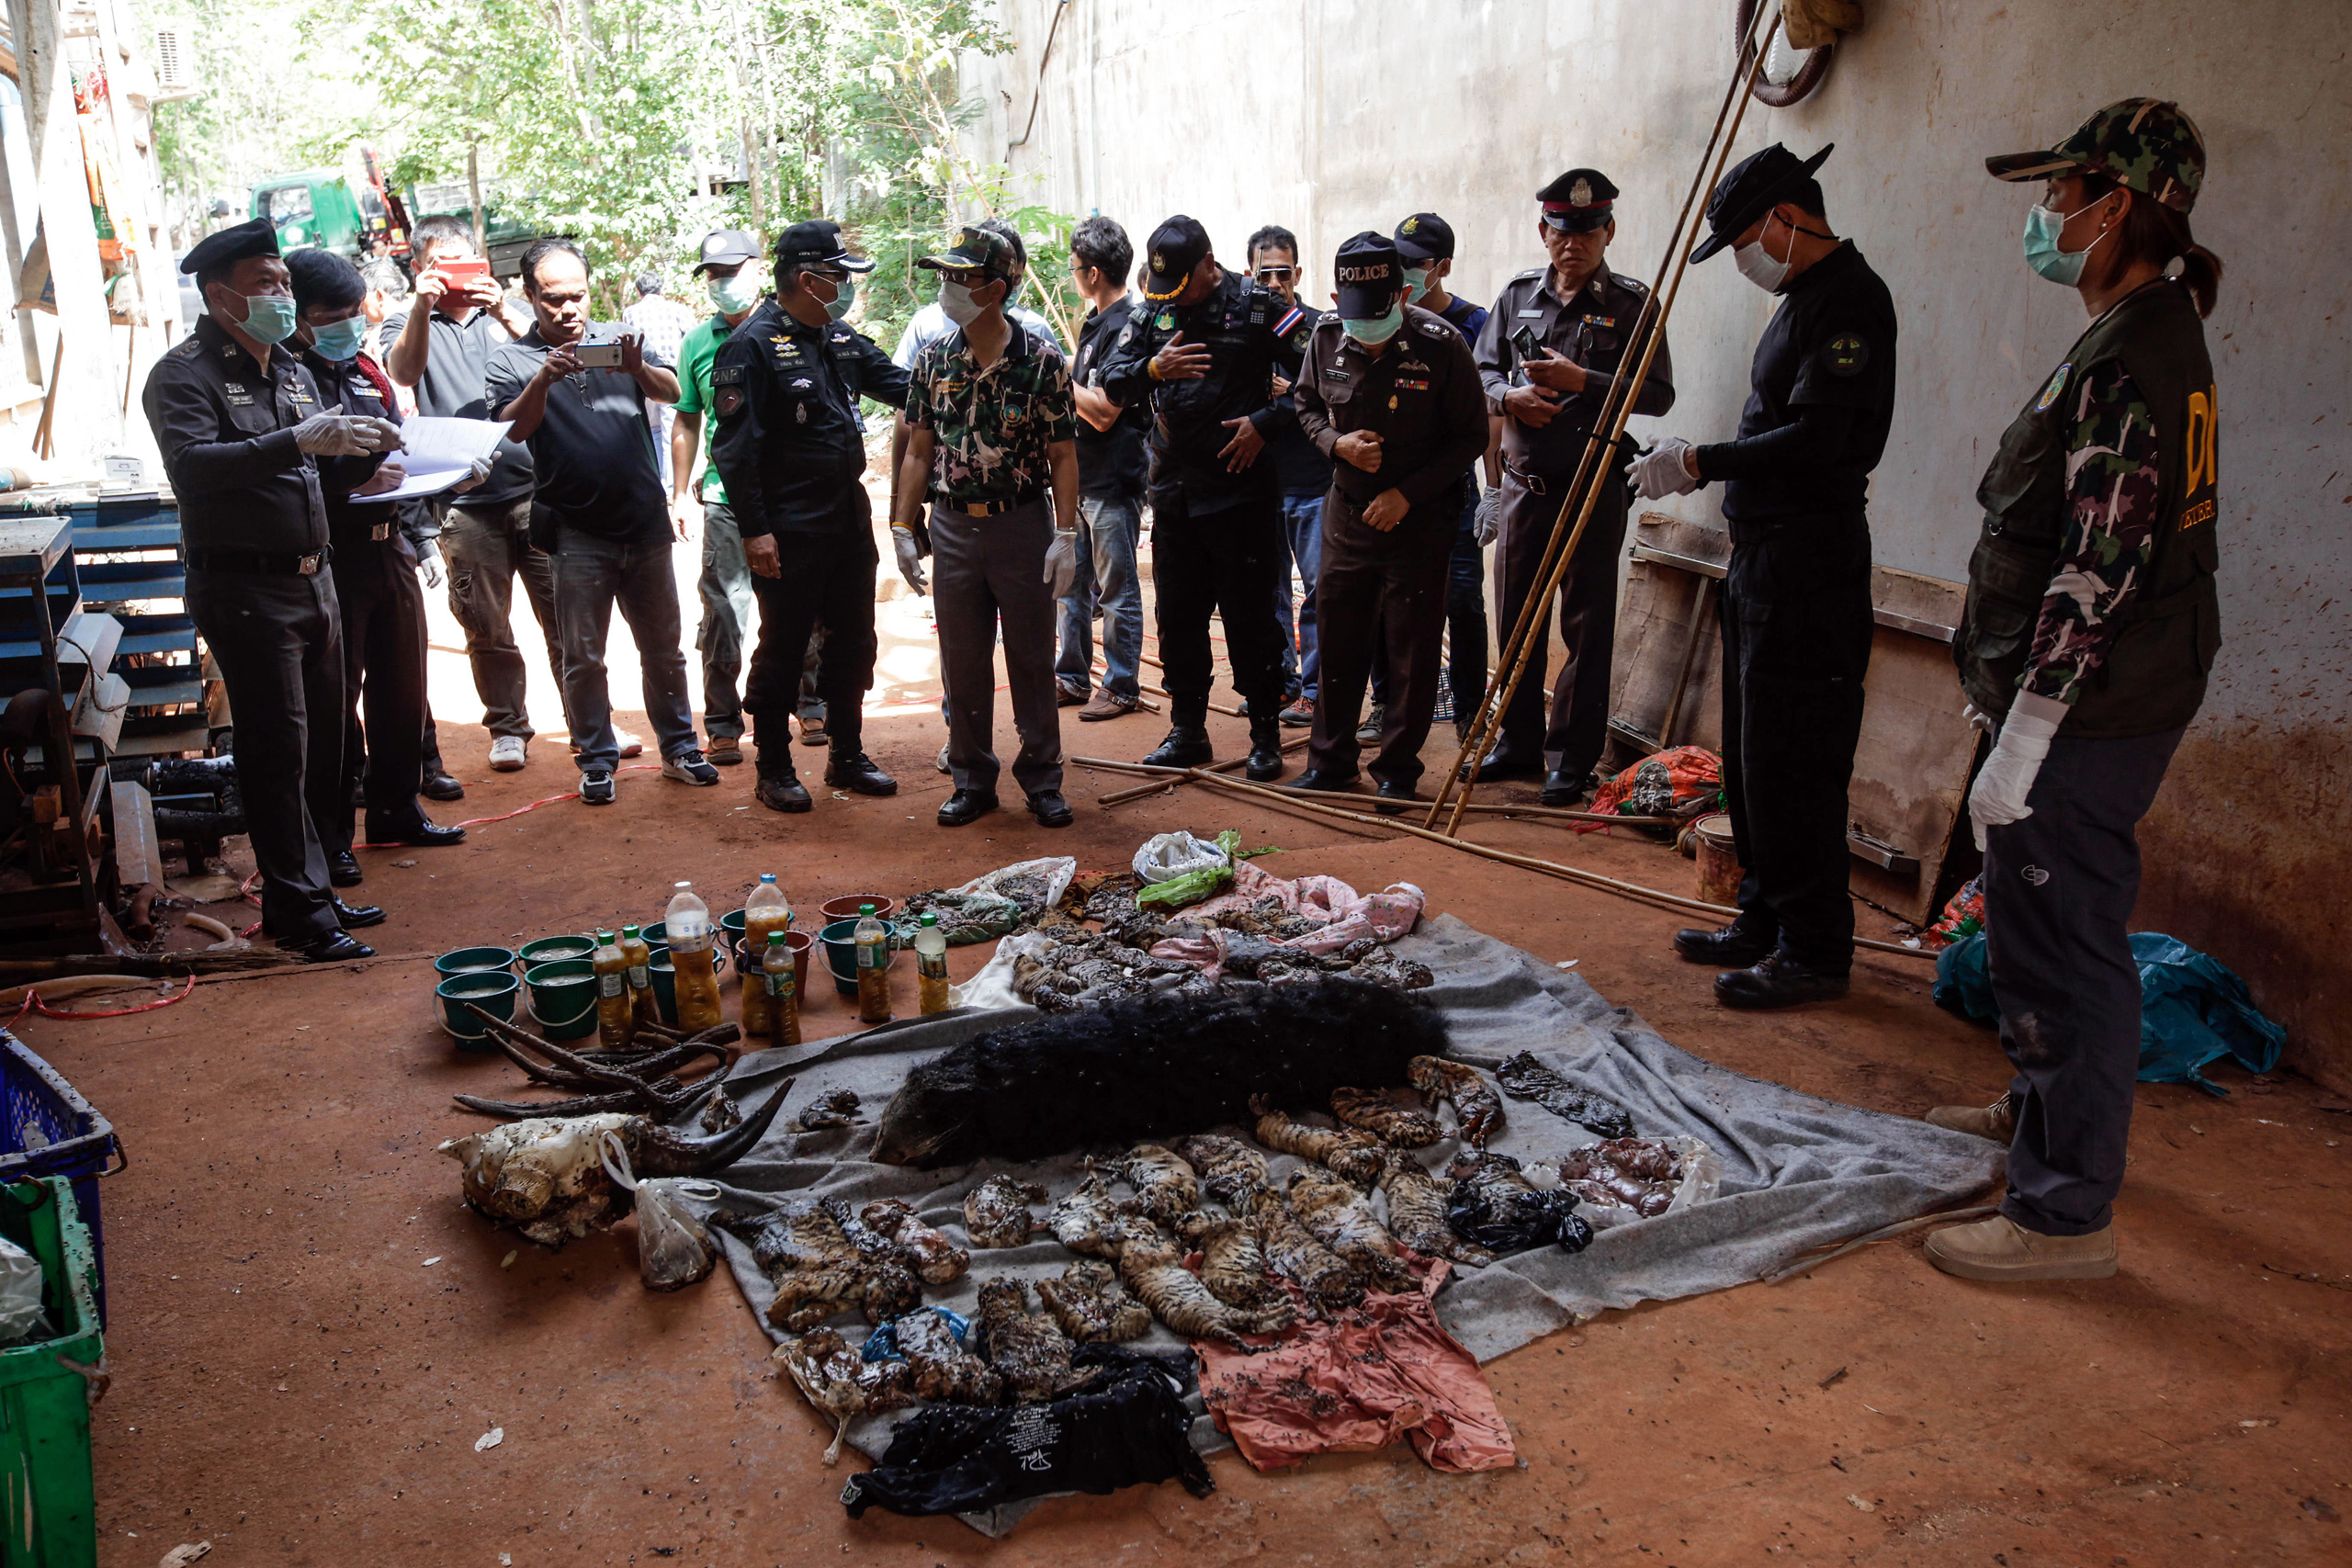 Thai DNP officers observe the carcasses of 40 tiger cubs and a binturong (also known as a bearcat) found undeclared at the Wat Pha Luang Ta Bua Tiger Temple in Kanchanaburi province, Thailand on June 1, 2016 . (Dario Pignatelli—Getty Images)